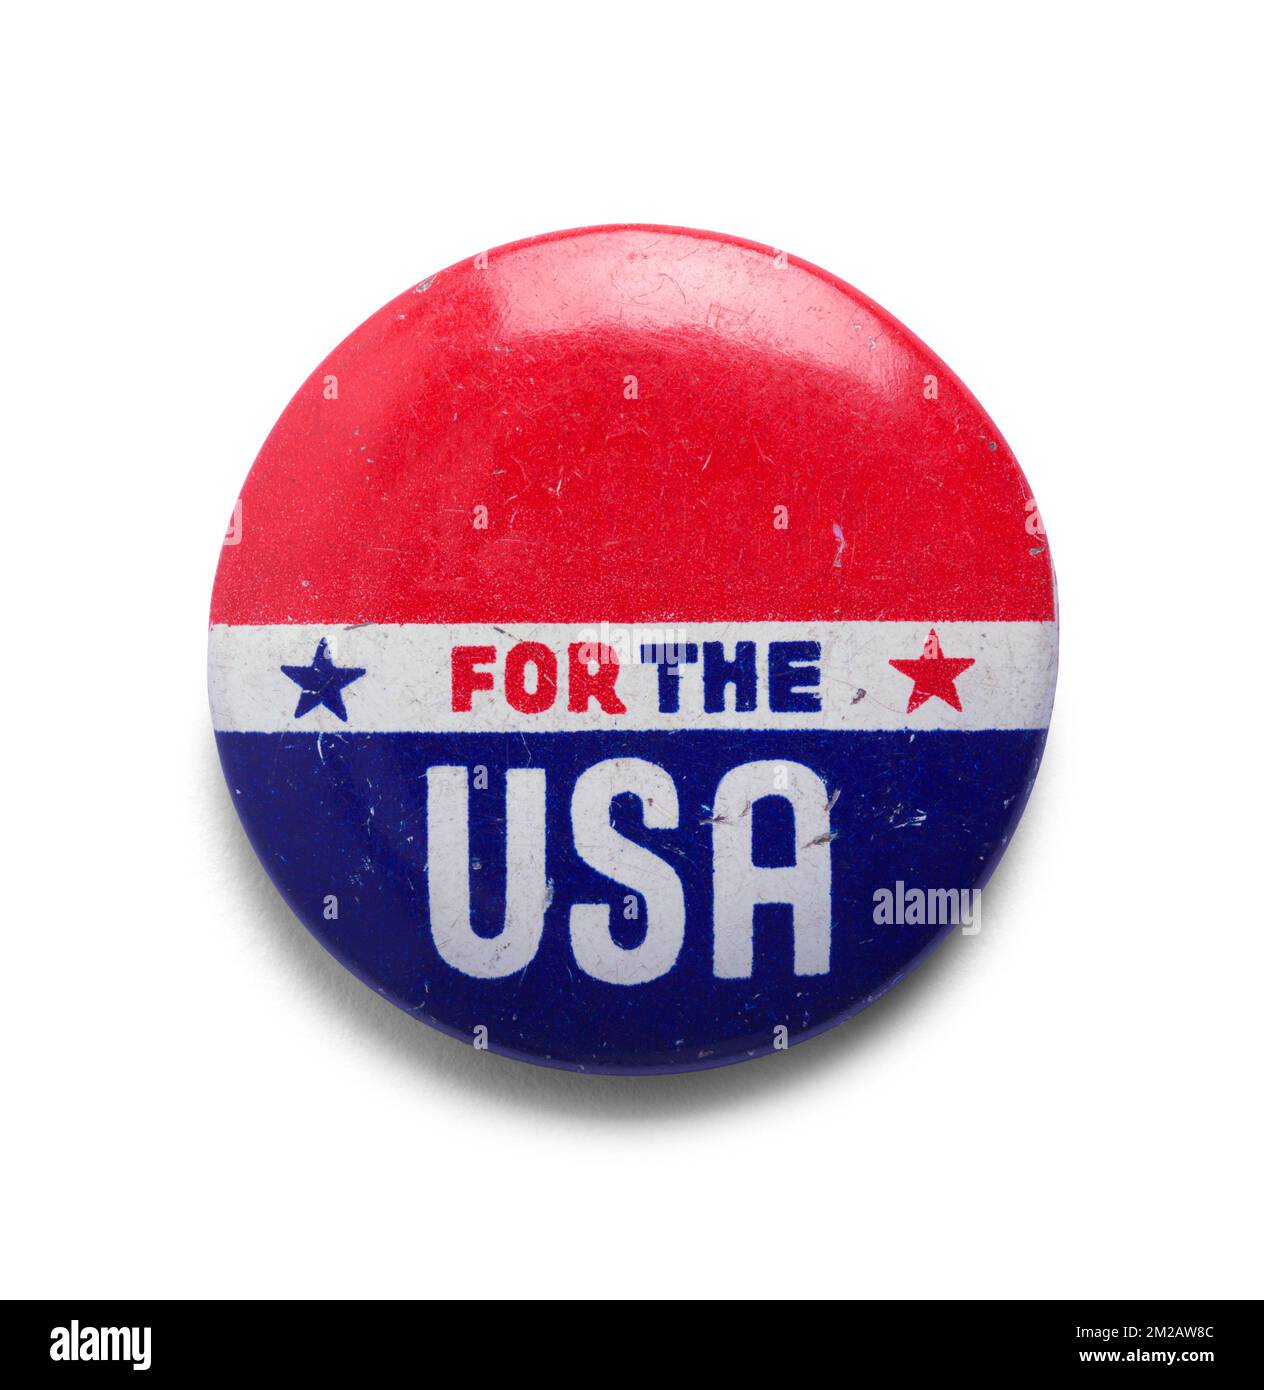 Antique Election Button Cut Out on White. Stock Photo